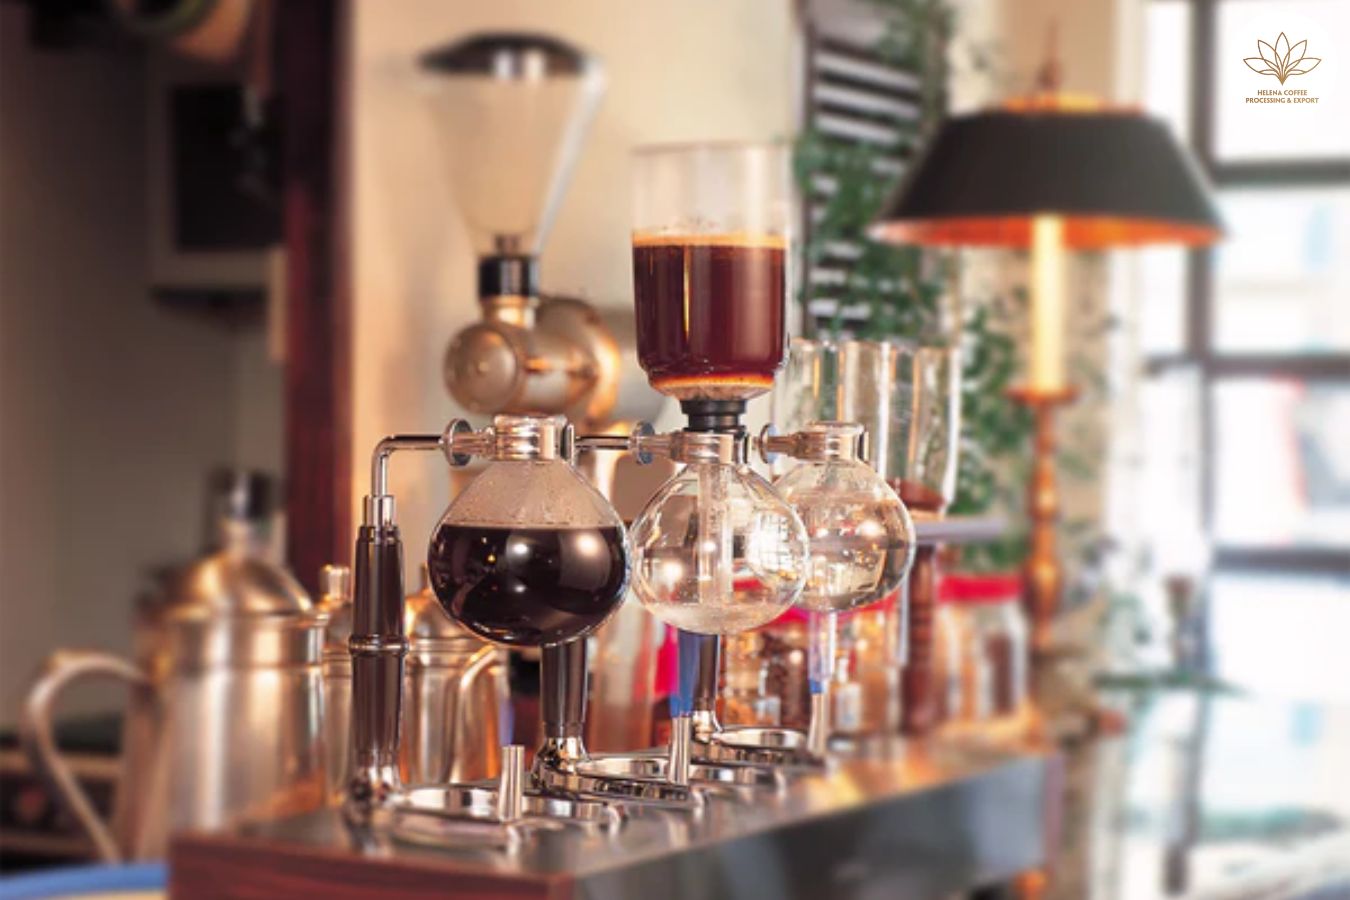 What is syphon brewing